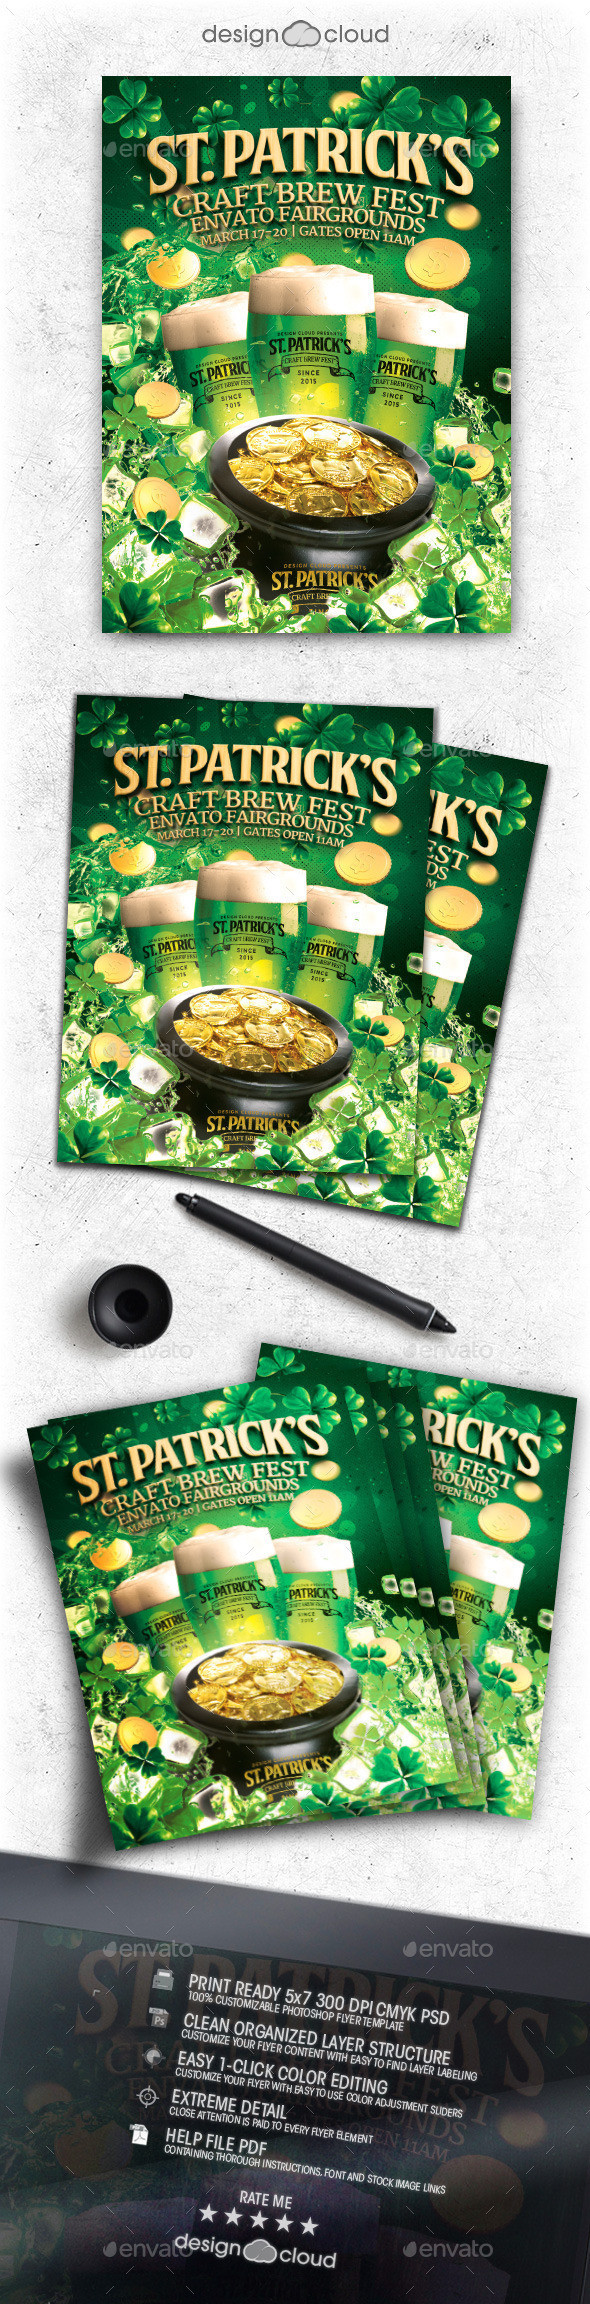 Preview st patricks day beer fest flyer template